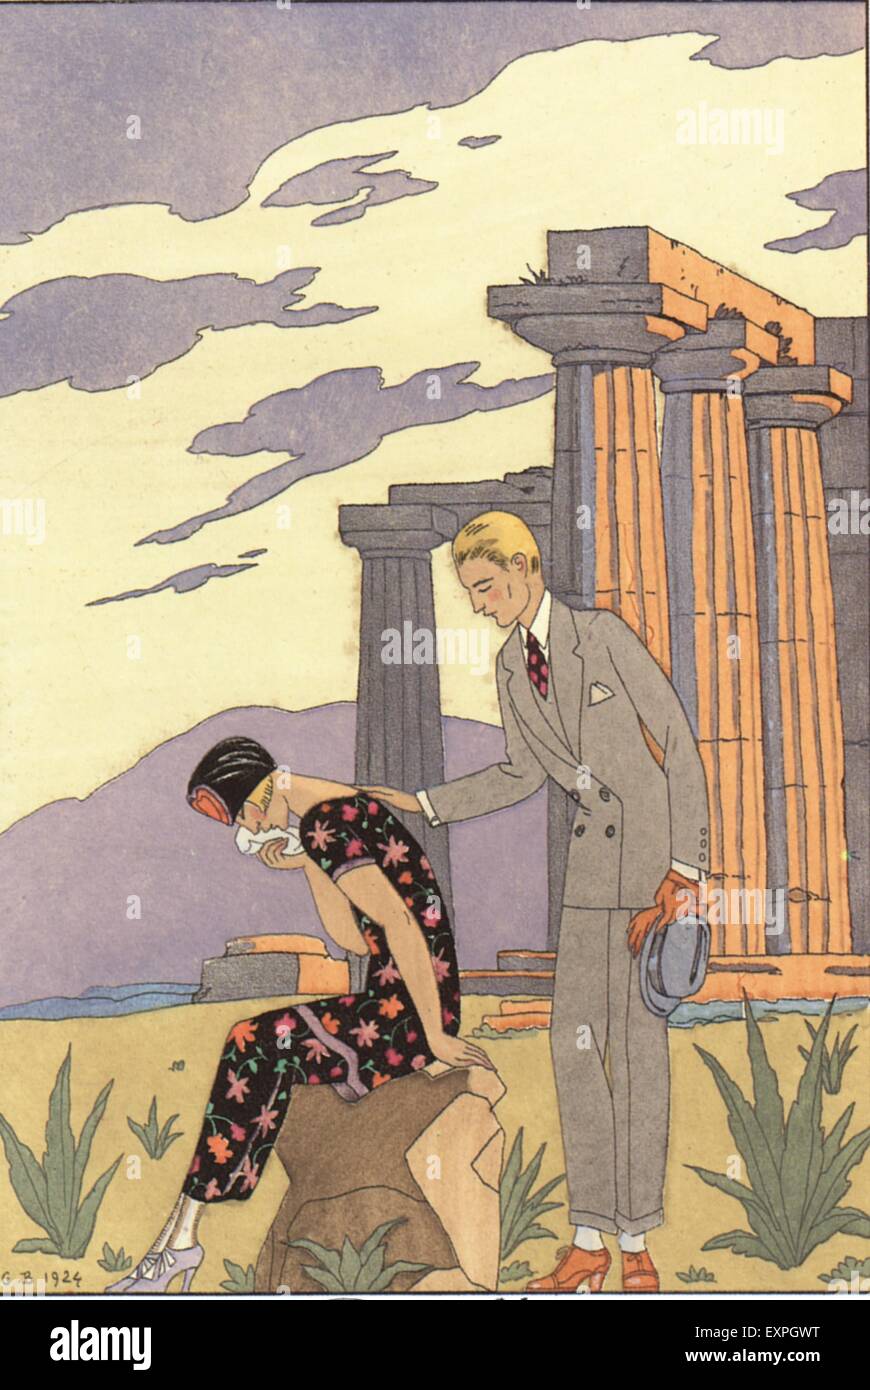 1920s France George Barbier Magazine Plate Stock Photo